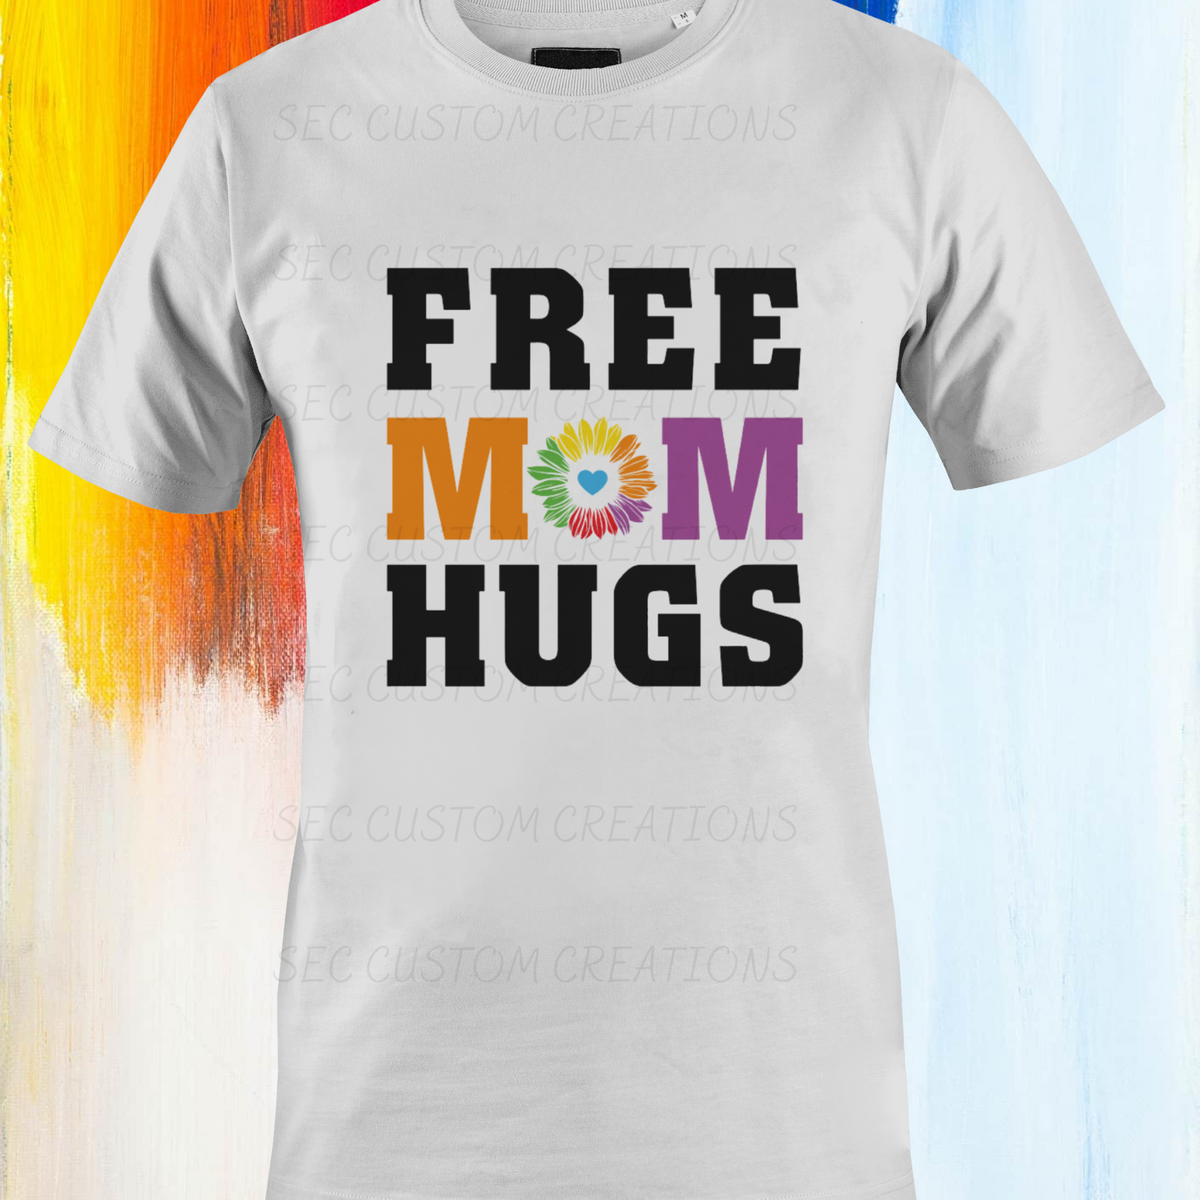 Premium Vector  A shirt that says a mother's hug lets go.